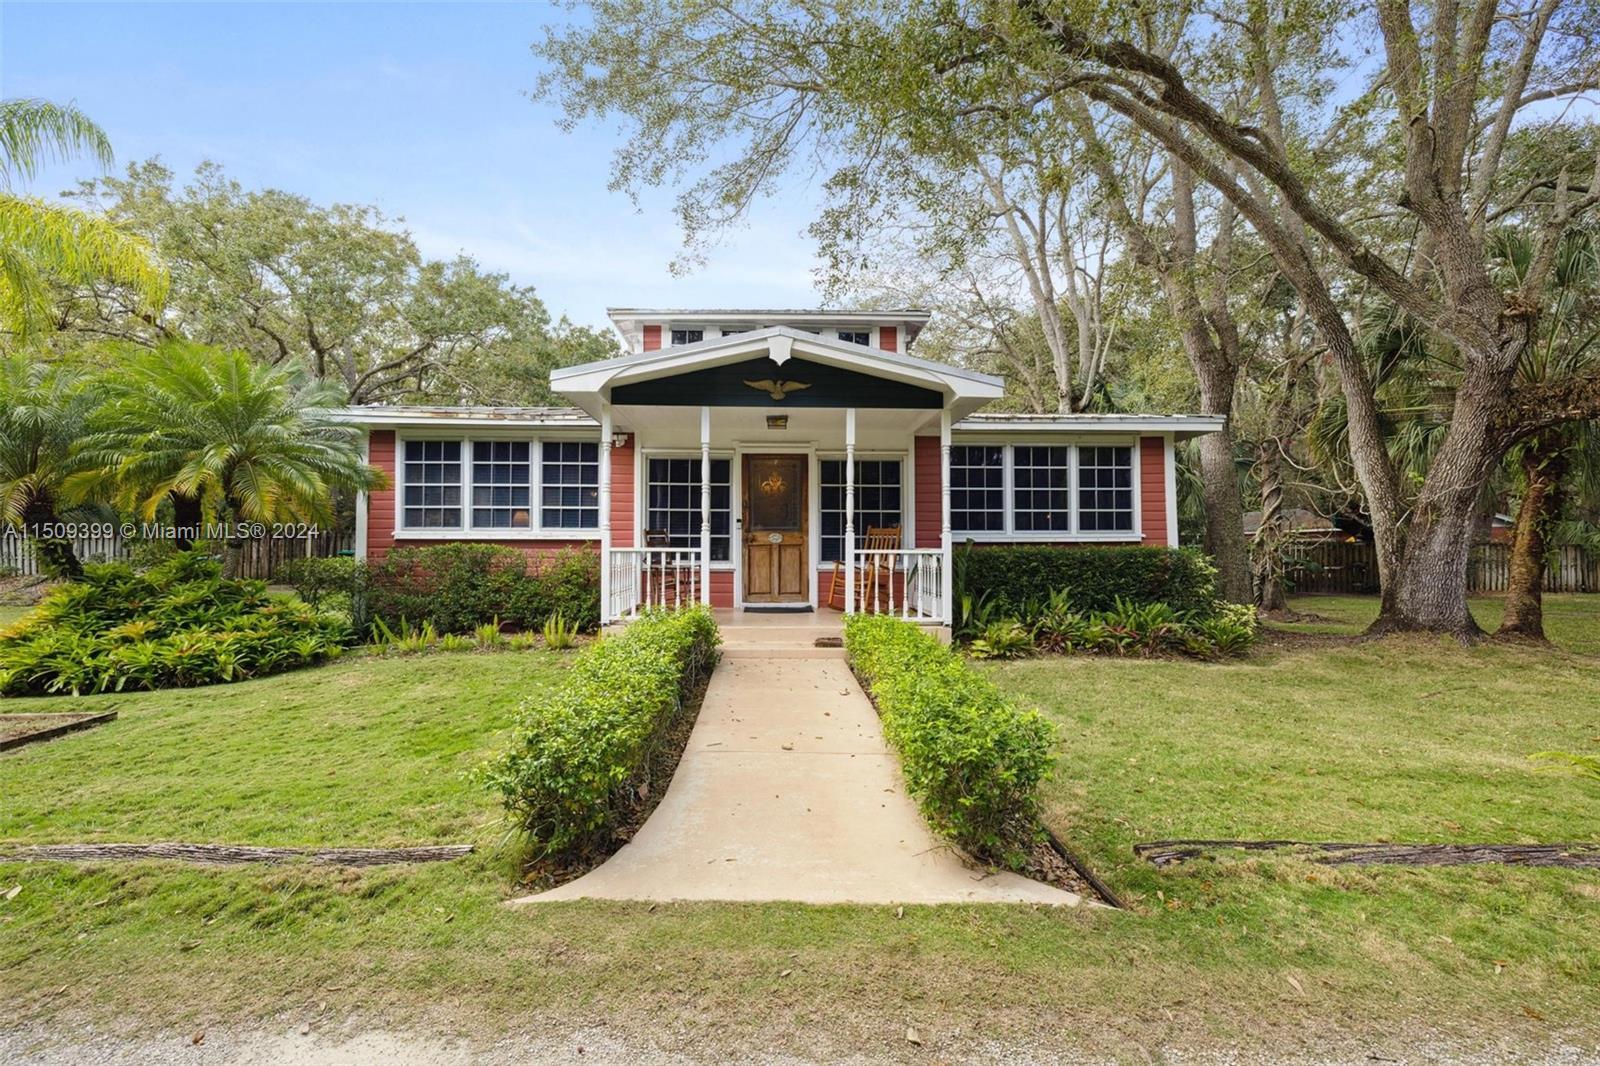 Old Florida Home on 1.95 acres in Palmetto Bay! Crown jewel looking for only its fourth homeowner ev